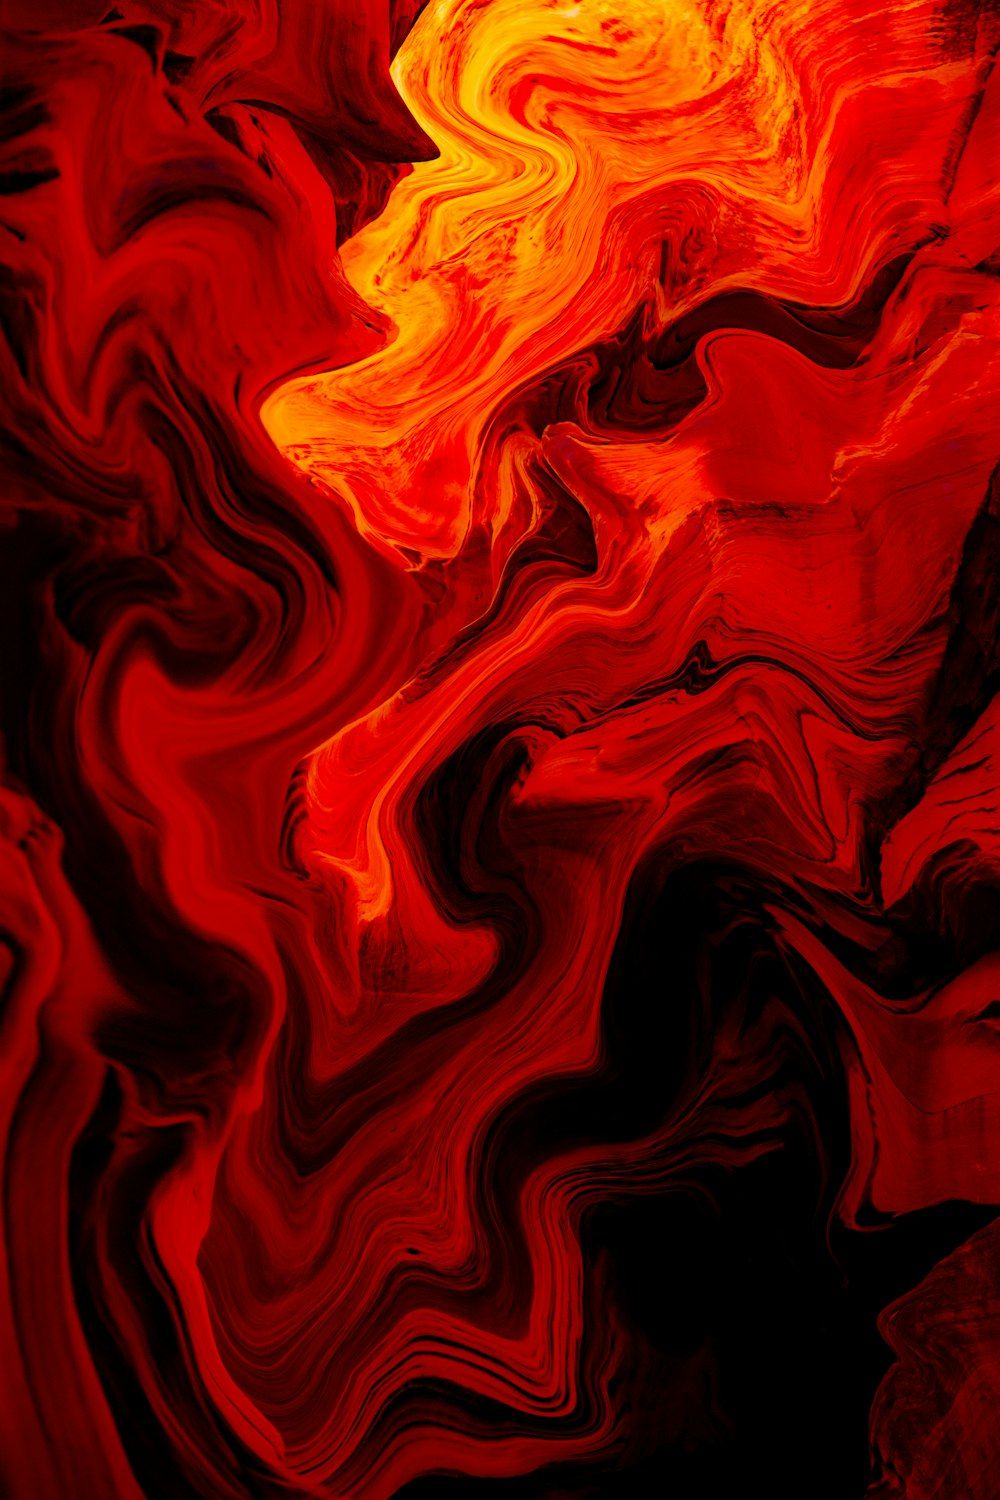 red and black abstract painting photo – Free Image on Unsplash